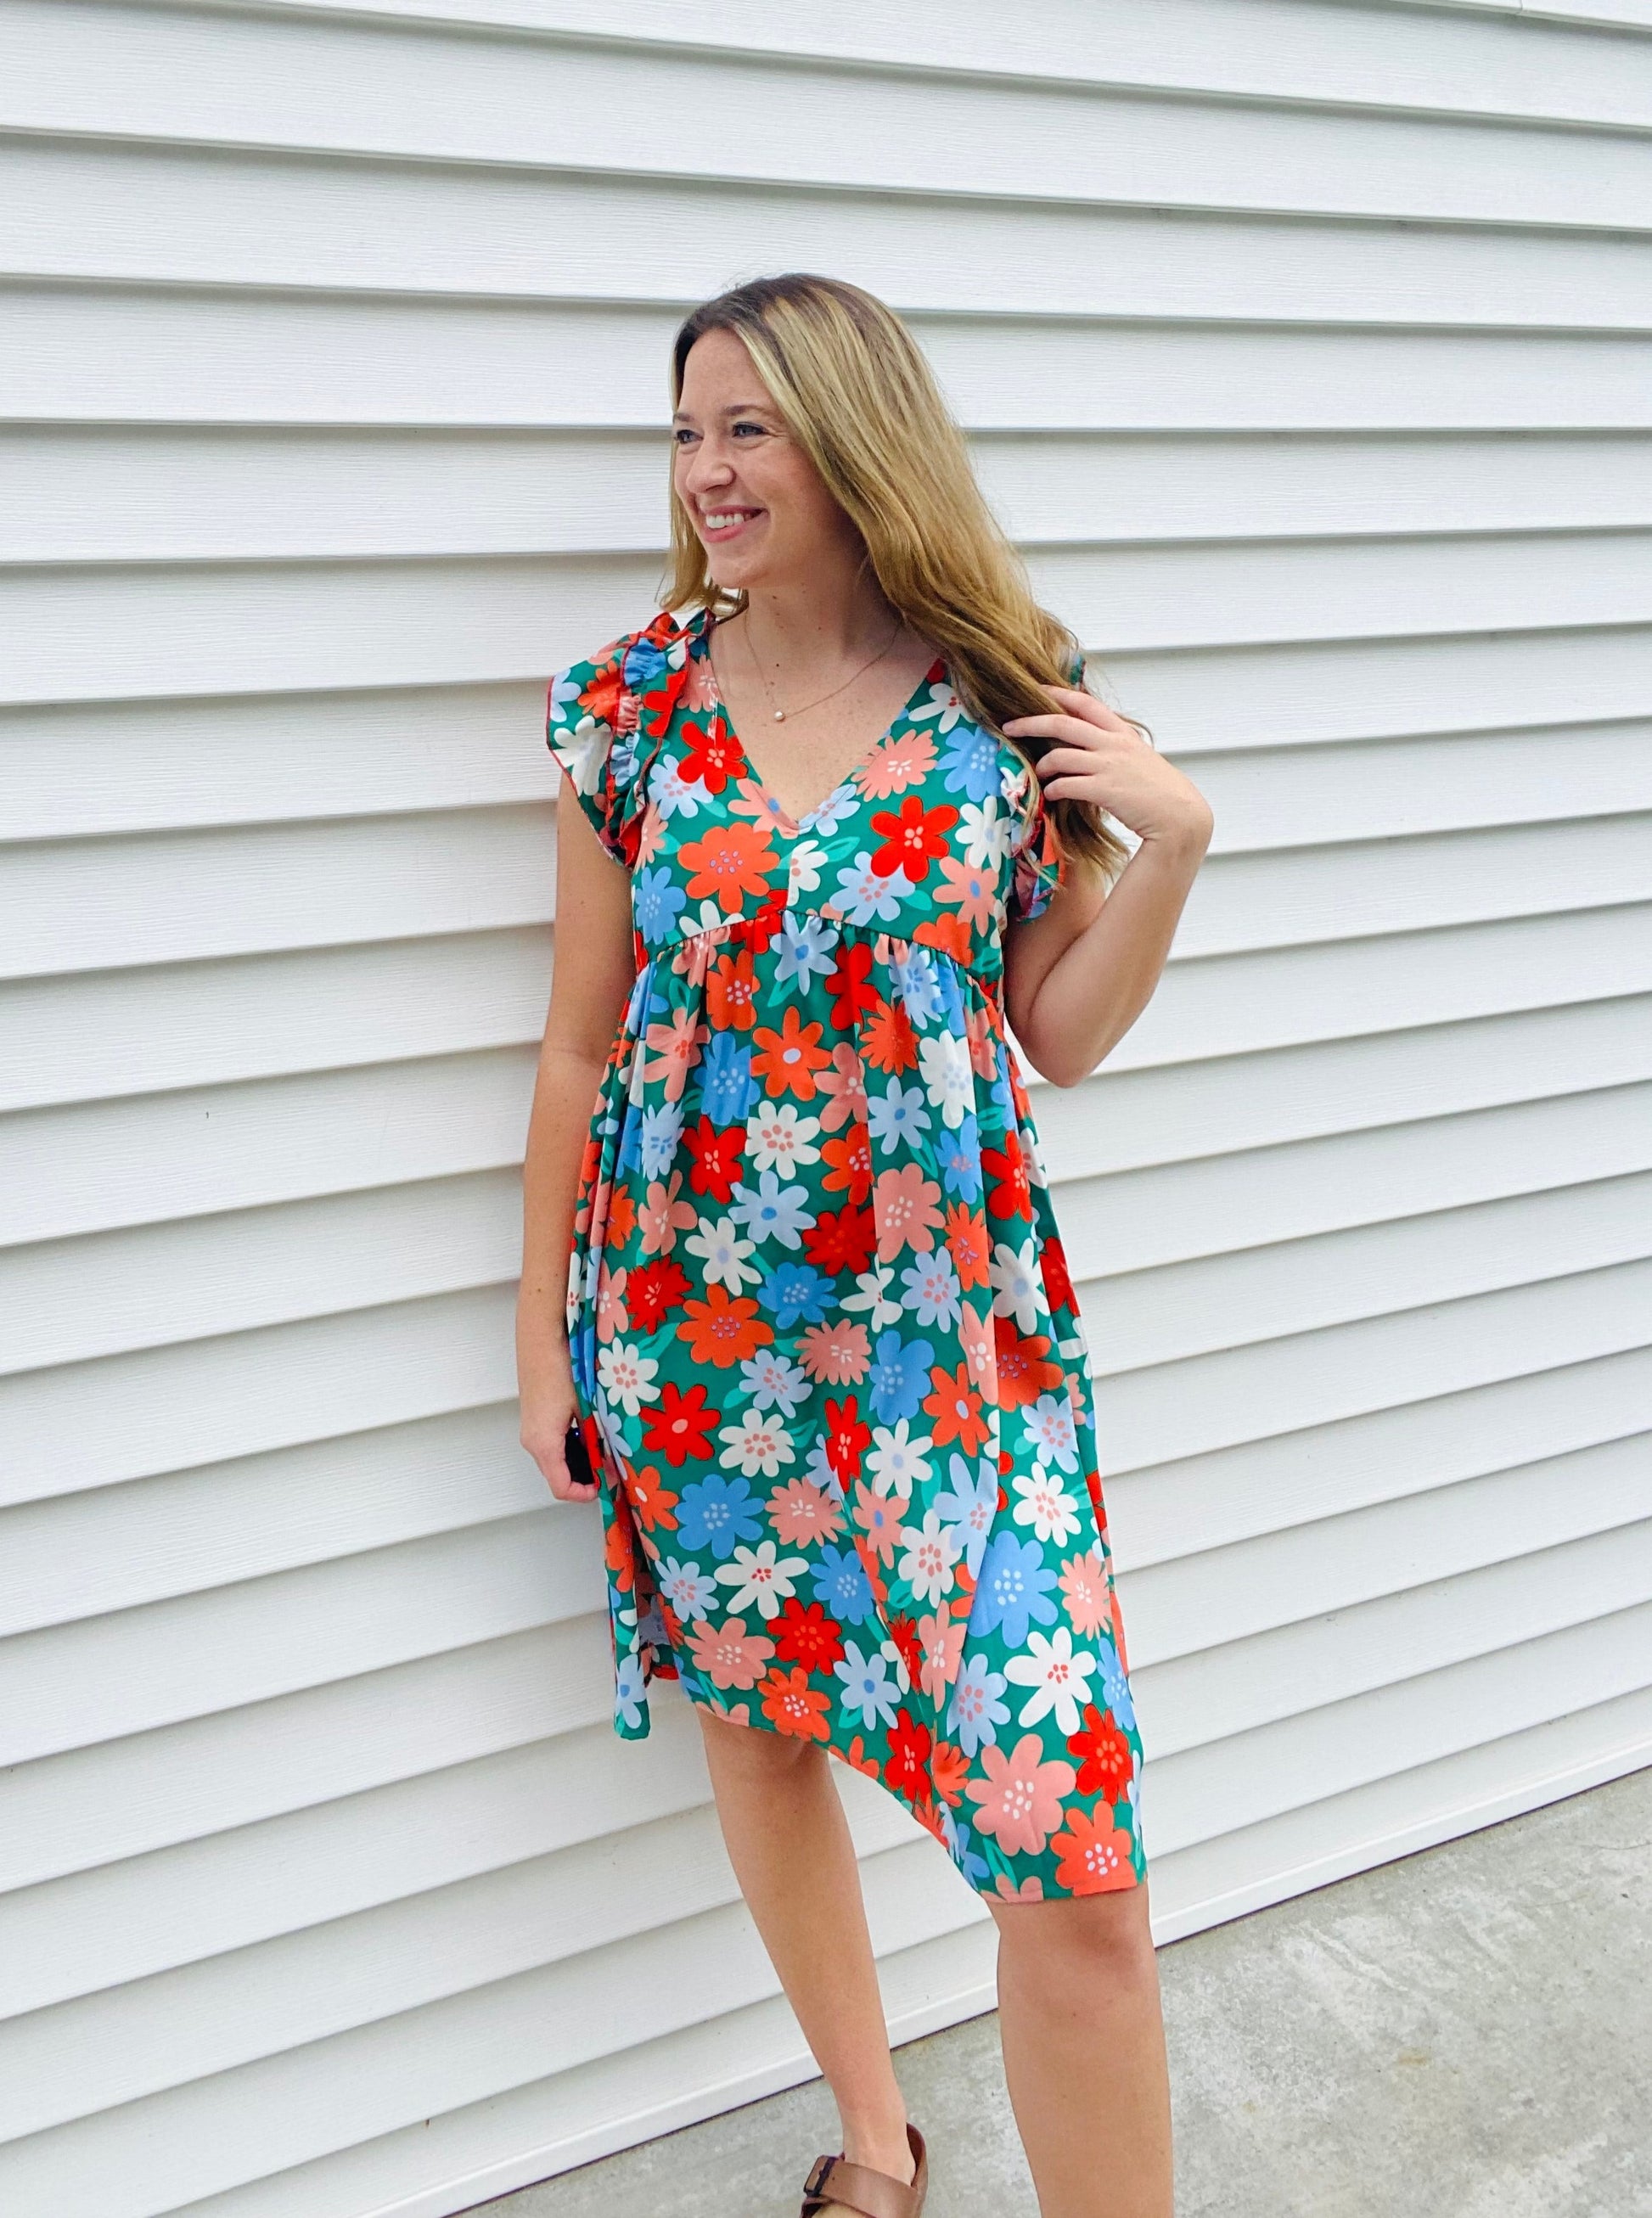 This V-neck babydoll dress flaunts a charming double frill ruffle yoke and is adorned with a multicolor floral challis print. Crafted from a lightweight woven fabric, it features modest short sleeves, side pockets, and a flattering midi length shift silhouette. A beautiful addition to your wardrobe.